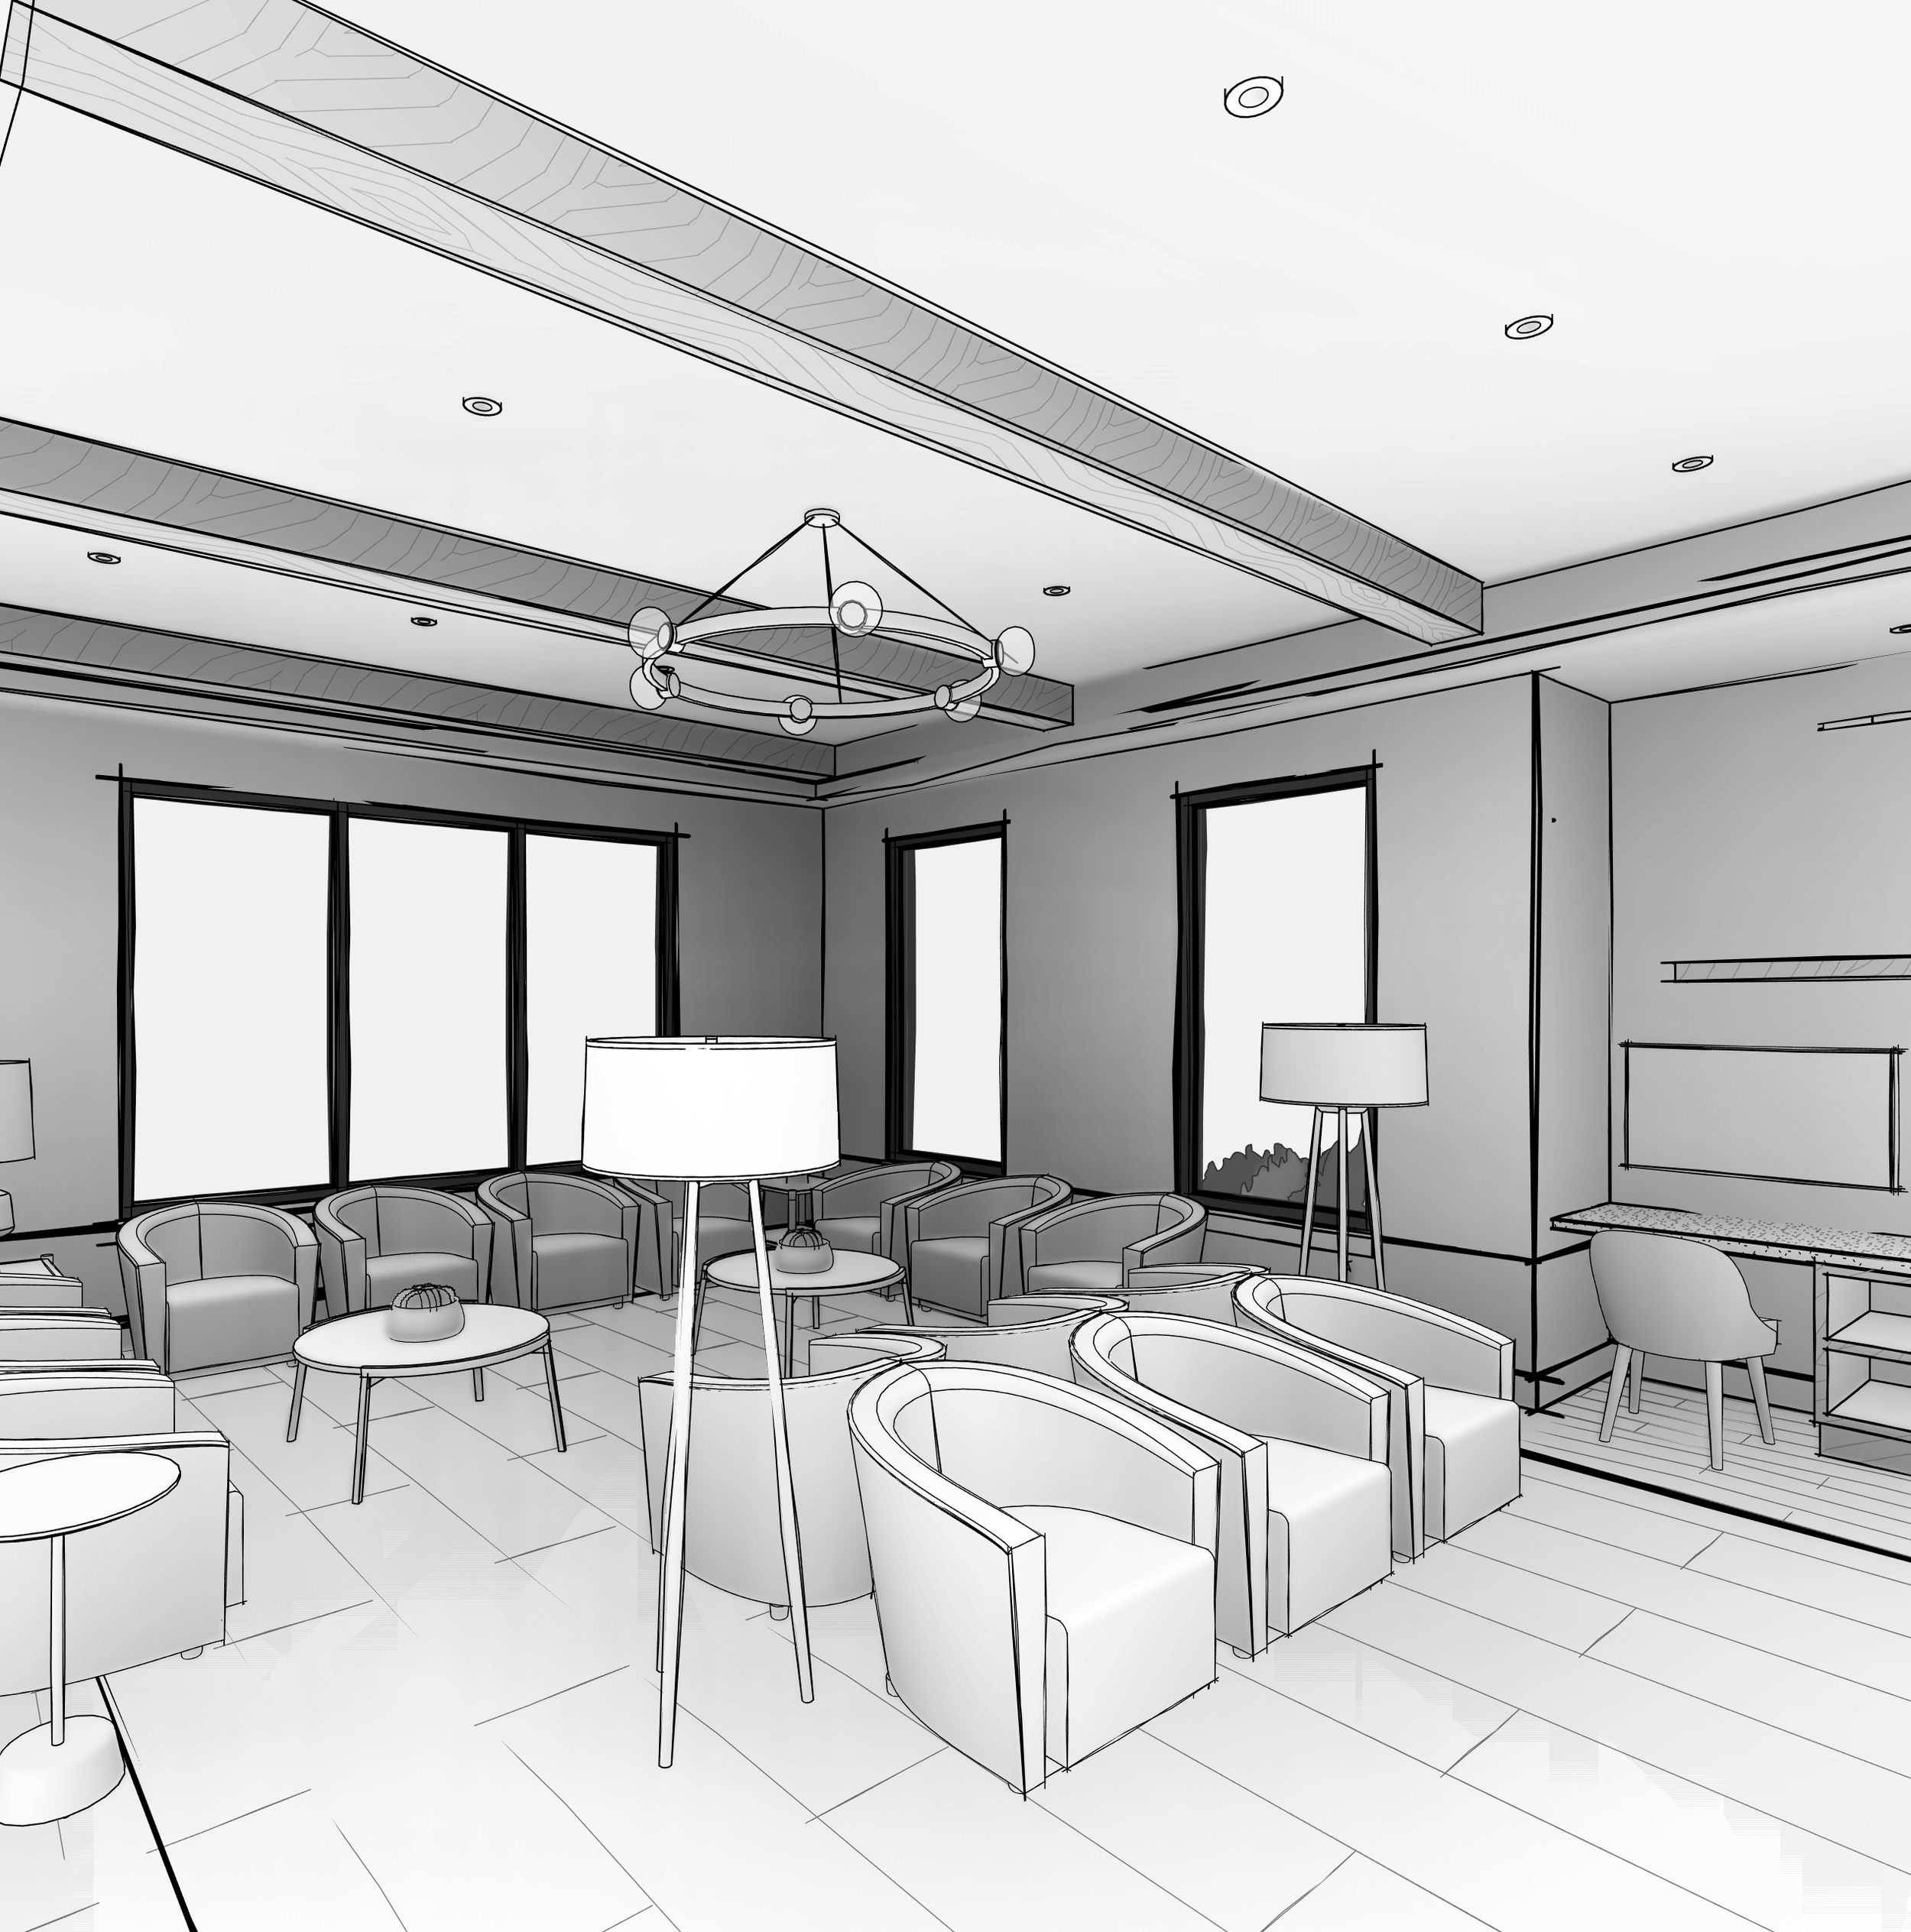 La Vernia Dental_ - 3D View - 02 WAITING ROOM - VIEW TO EXTERIOR.png